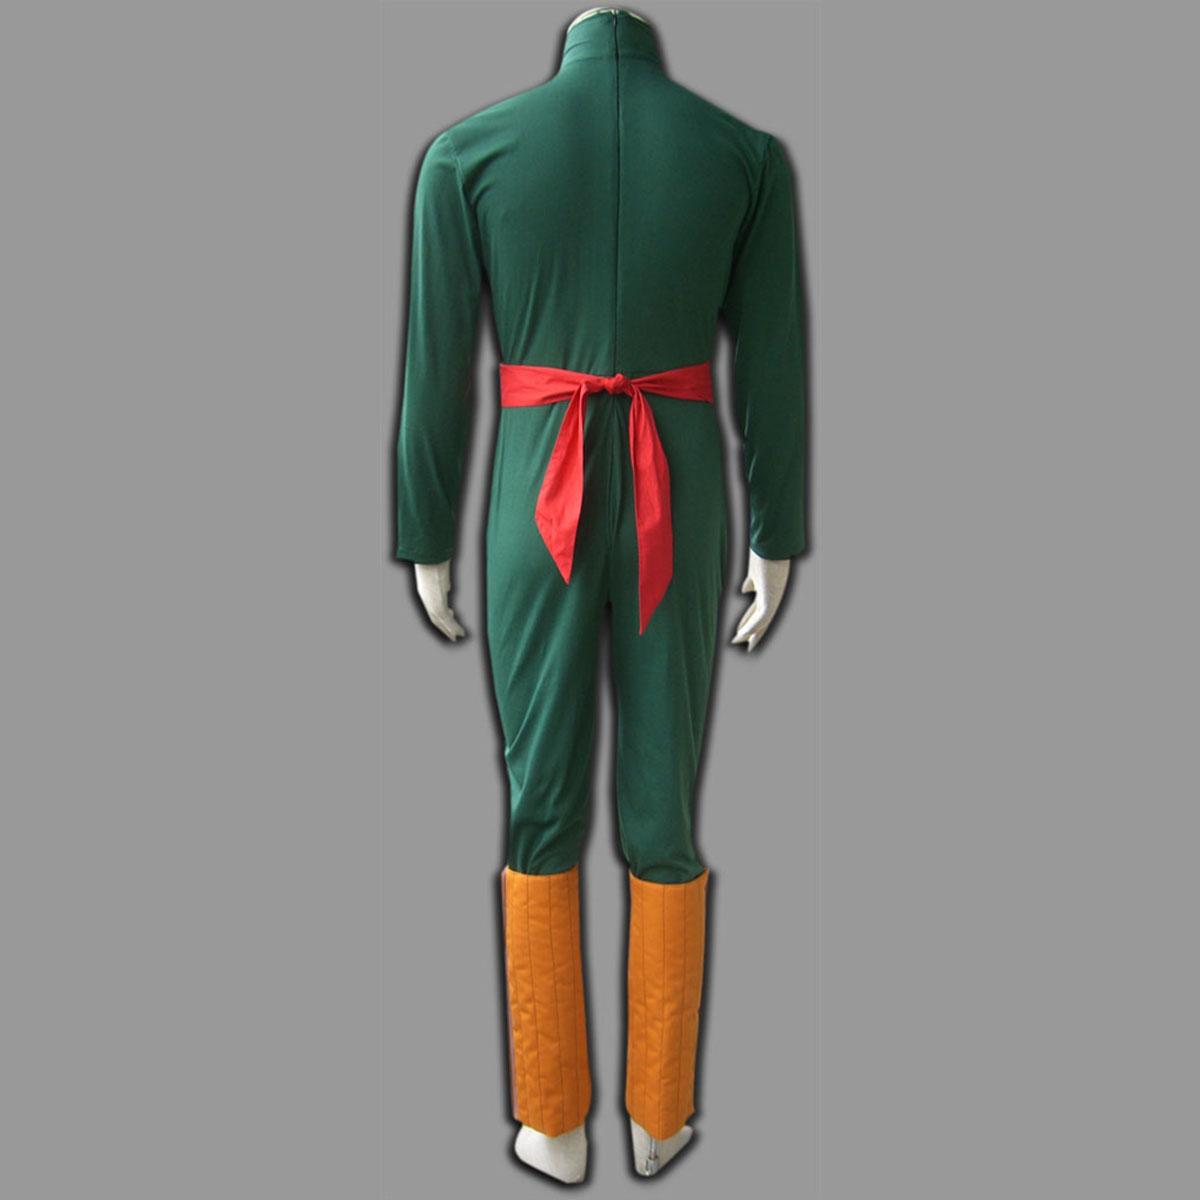 Naruto Rock Lee 1 Anime Cosplay Costumes Outfit